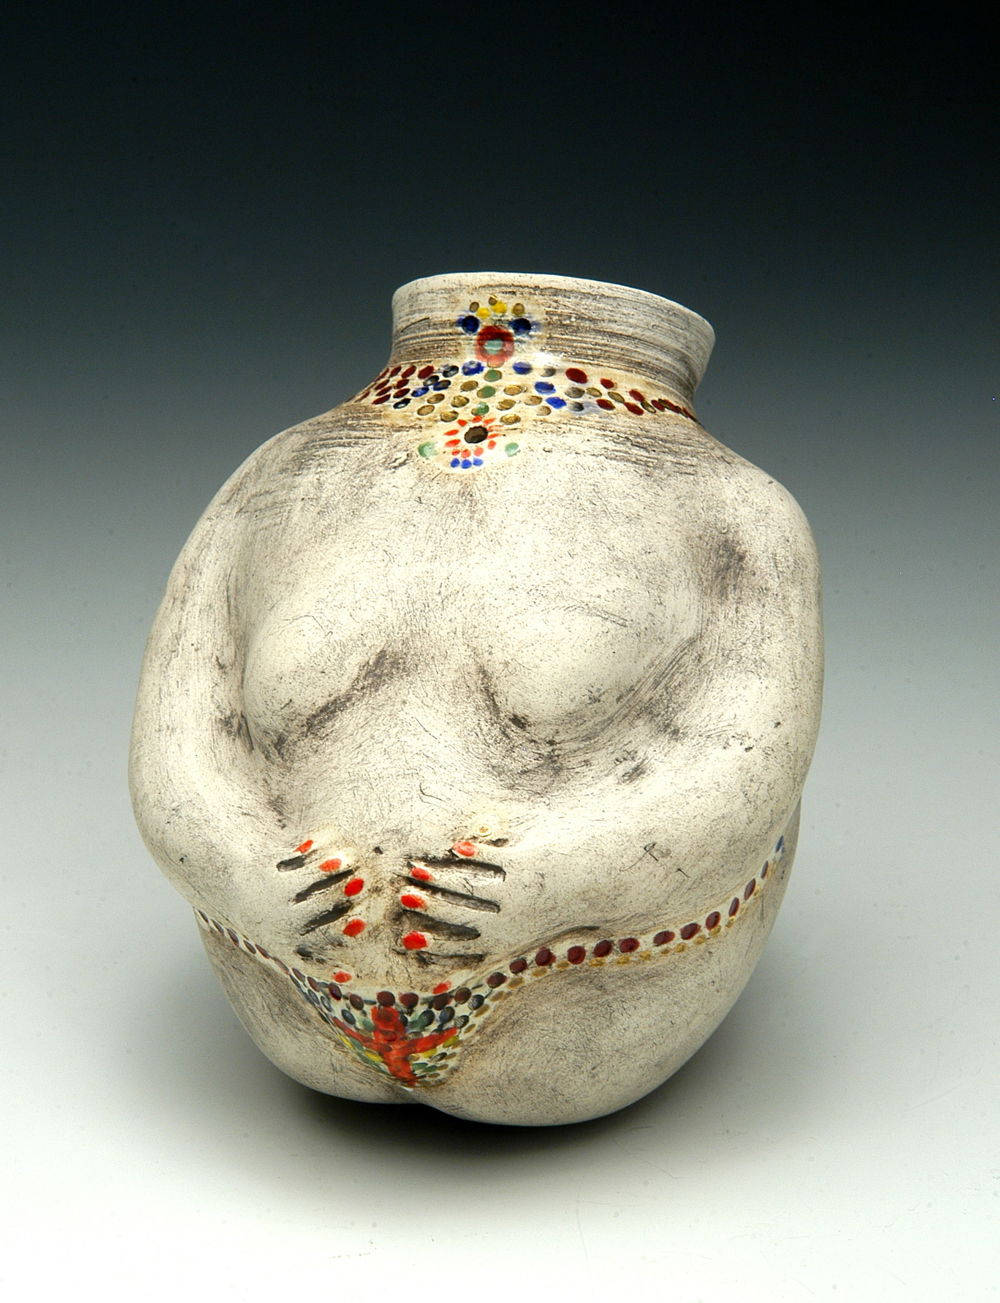 A ceramic vessel shaped like the body of a person whose arms meet in the center and are painted with red fingernails. Dots of color surround the neck and the bottom of the vessel like a jeweled necklace and belt.